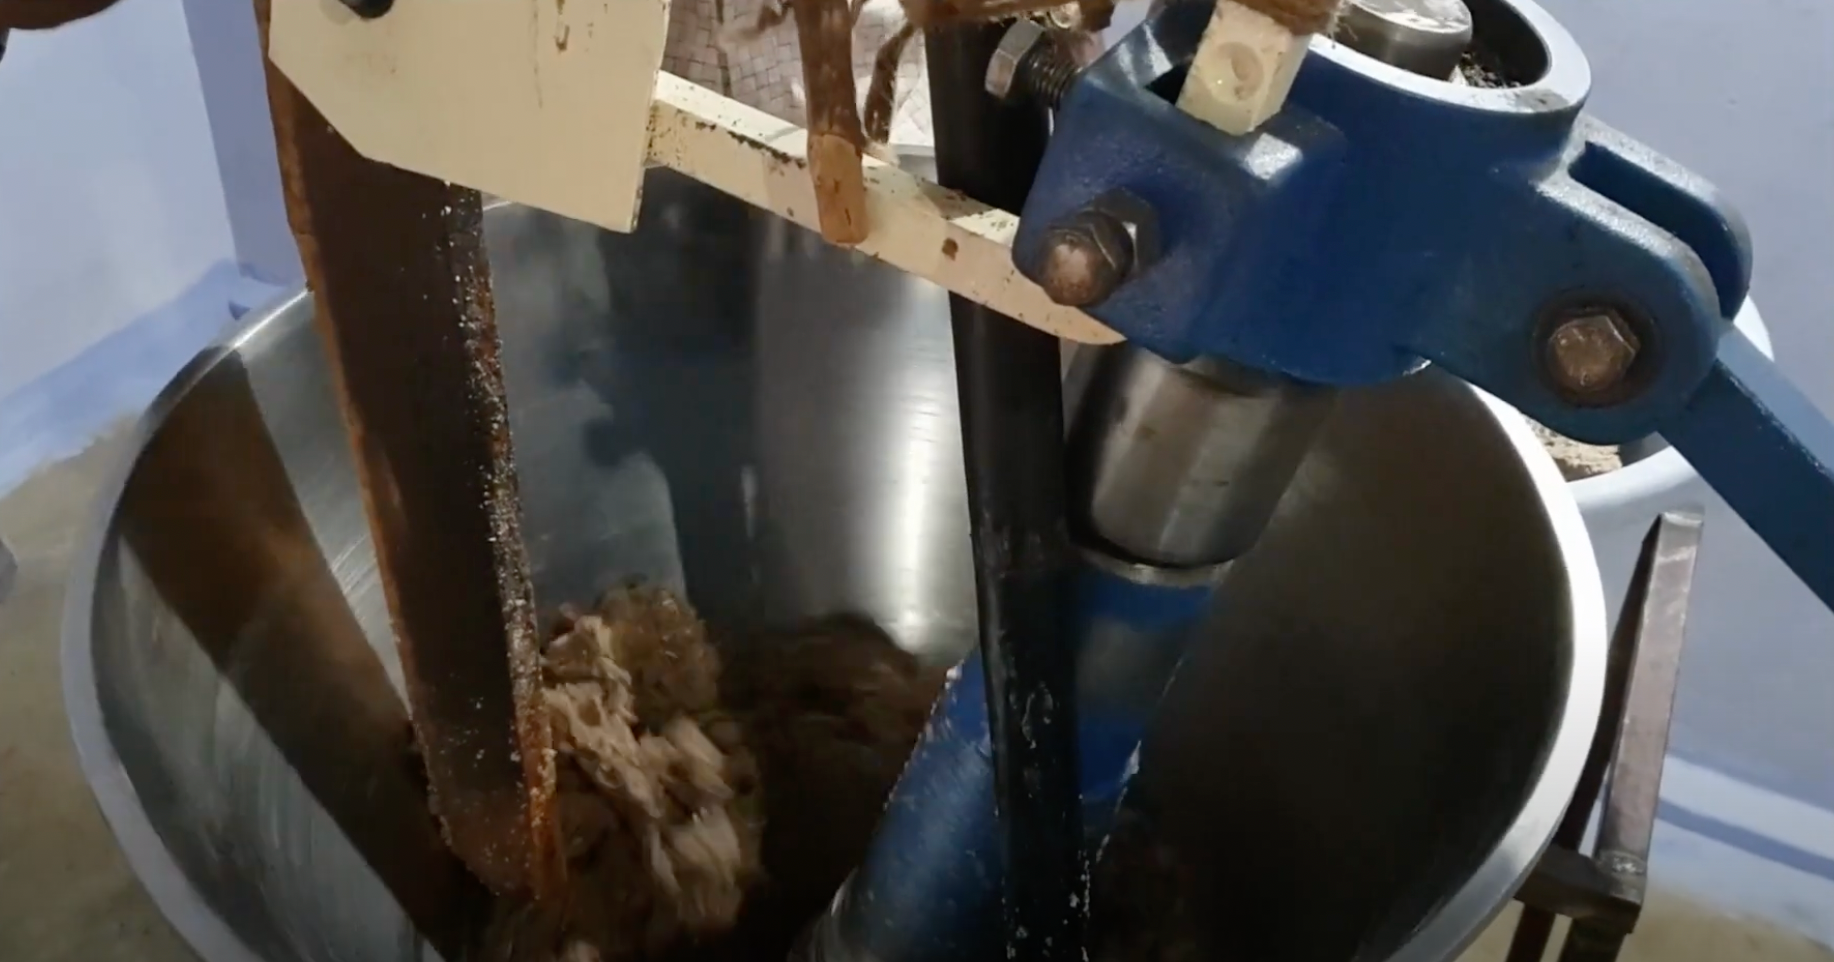 Load video: The dried raw material is then crushed to extract oil. Since we do not apply any heat or pressure, this is know as the Cold-Pressed method, which retains all the nutrients and flavour in its natural form. Here the oils are extracted slowly in small batches